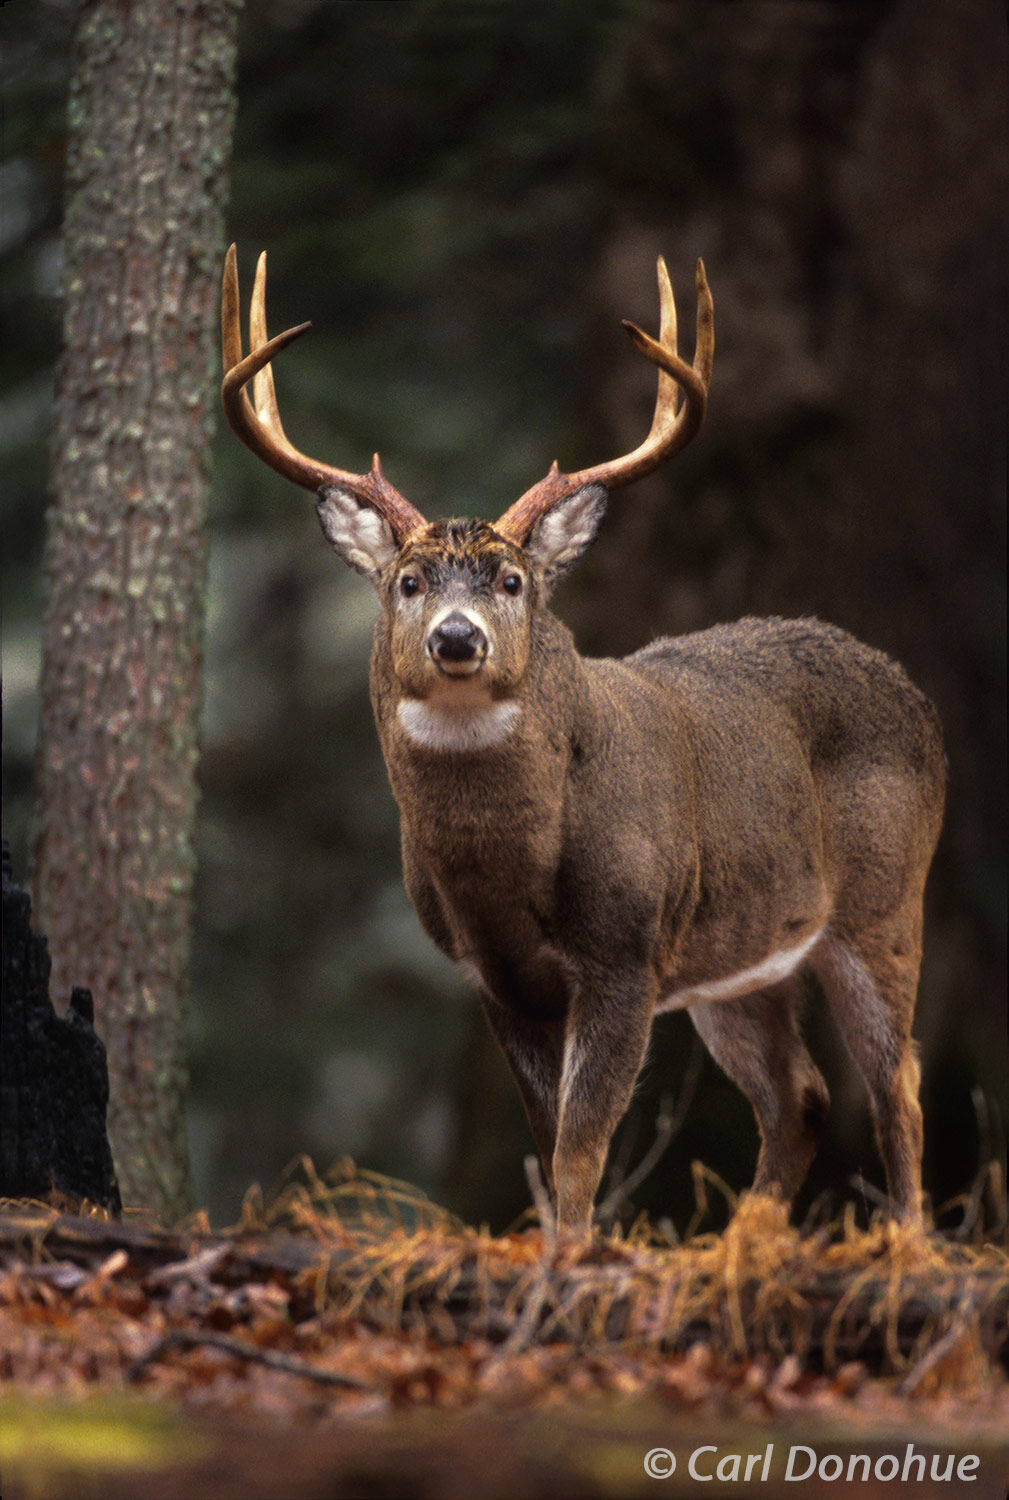 Whitetail deer, 8 point buck standing in forest, Cades Cove, Great Smoky Mountains National Park, Tennessee. This is a large...